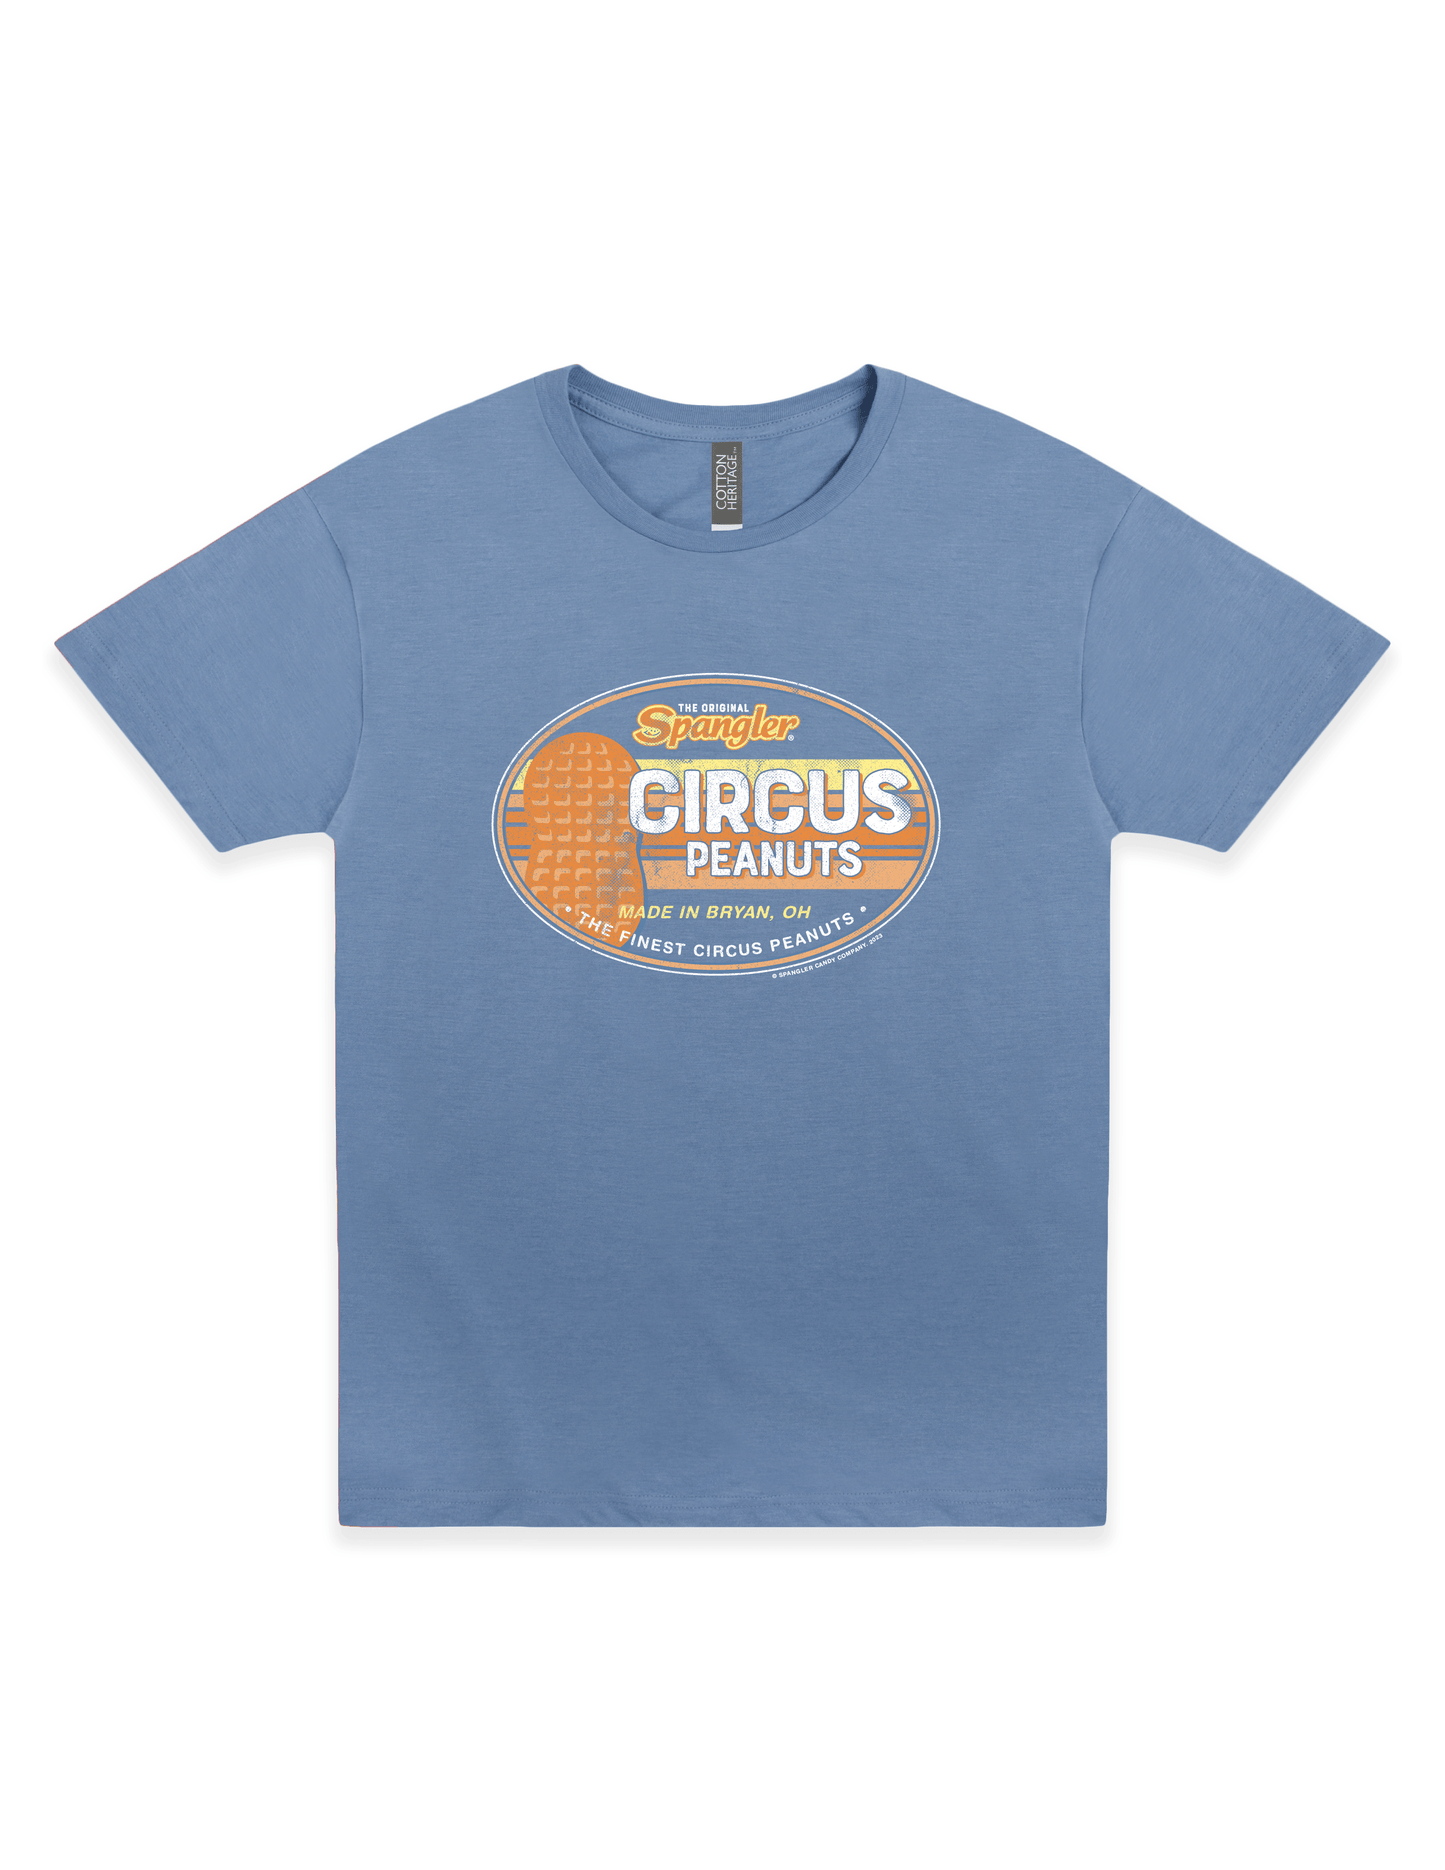 The Finest Circus Peanuts Since 1924 Retro Tee